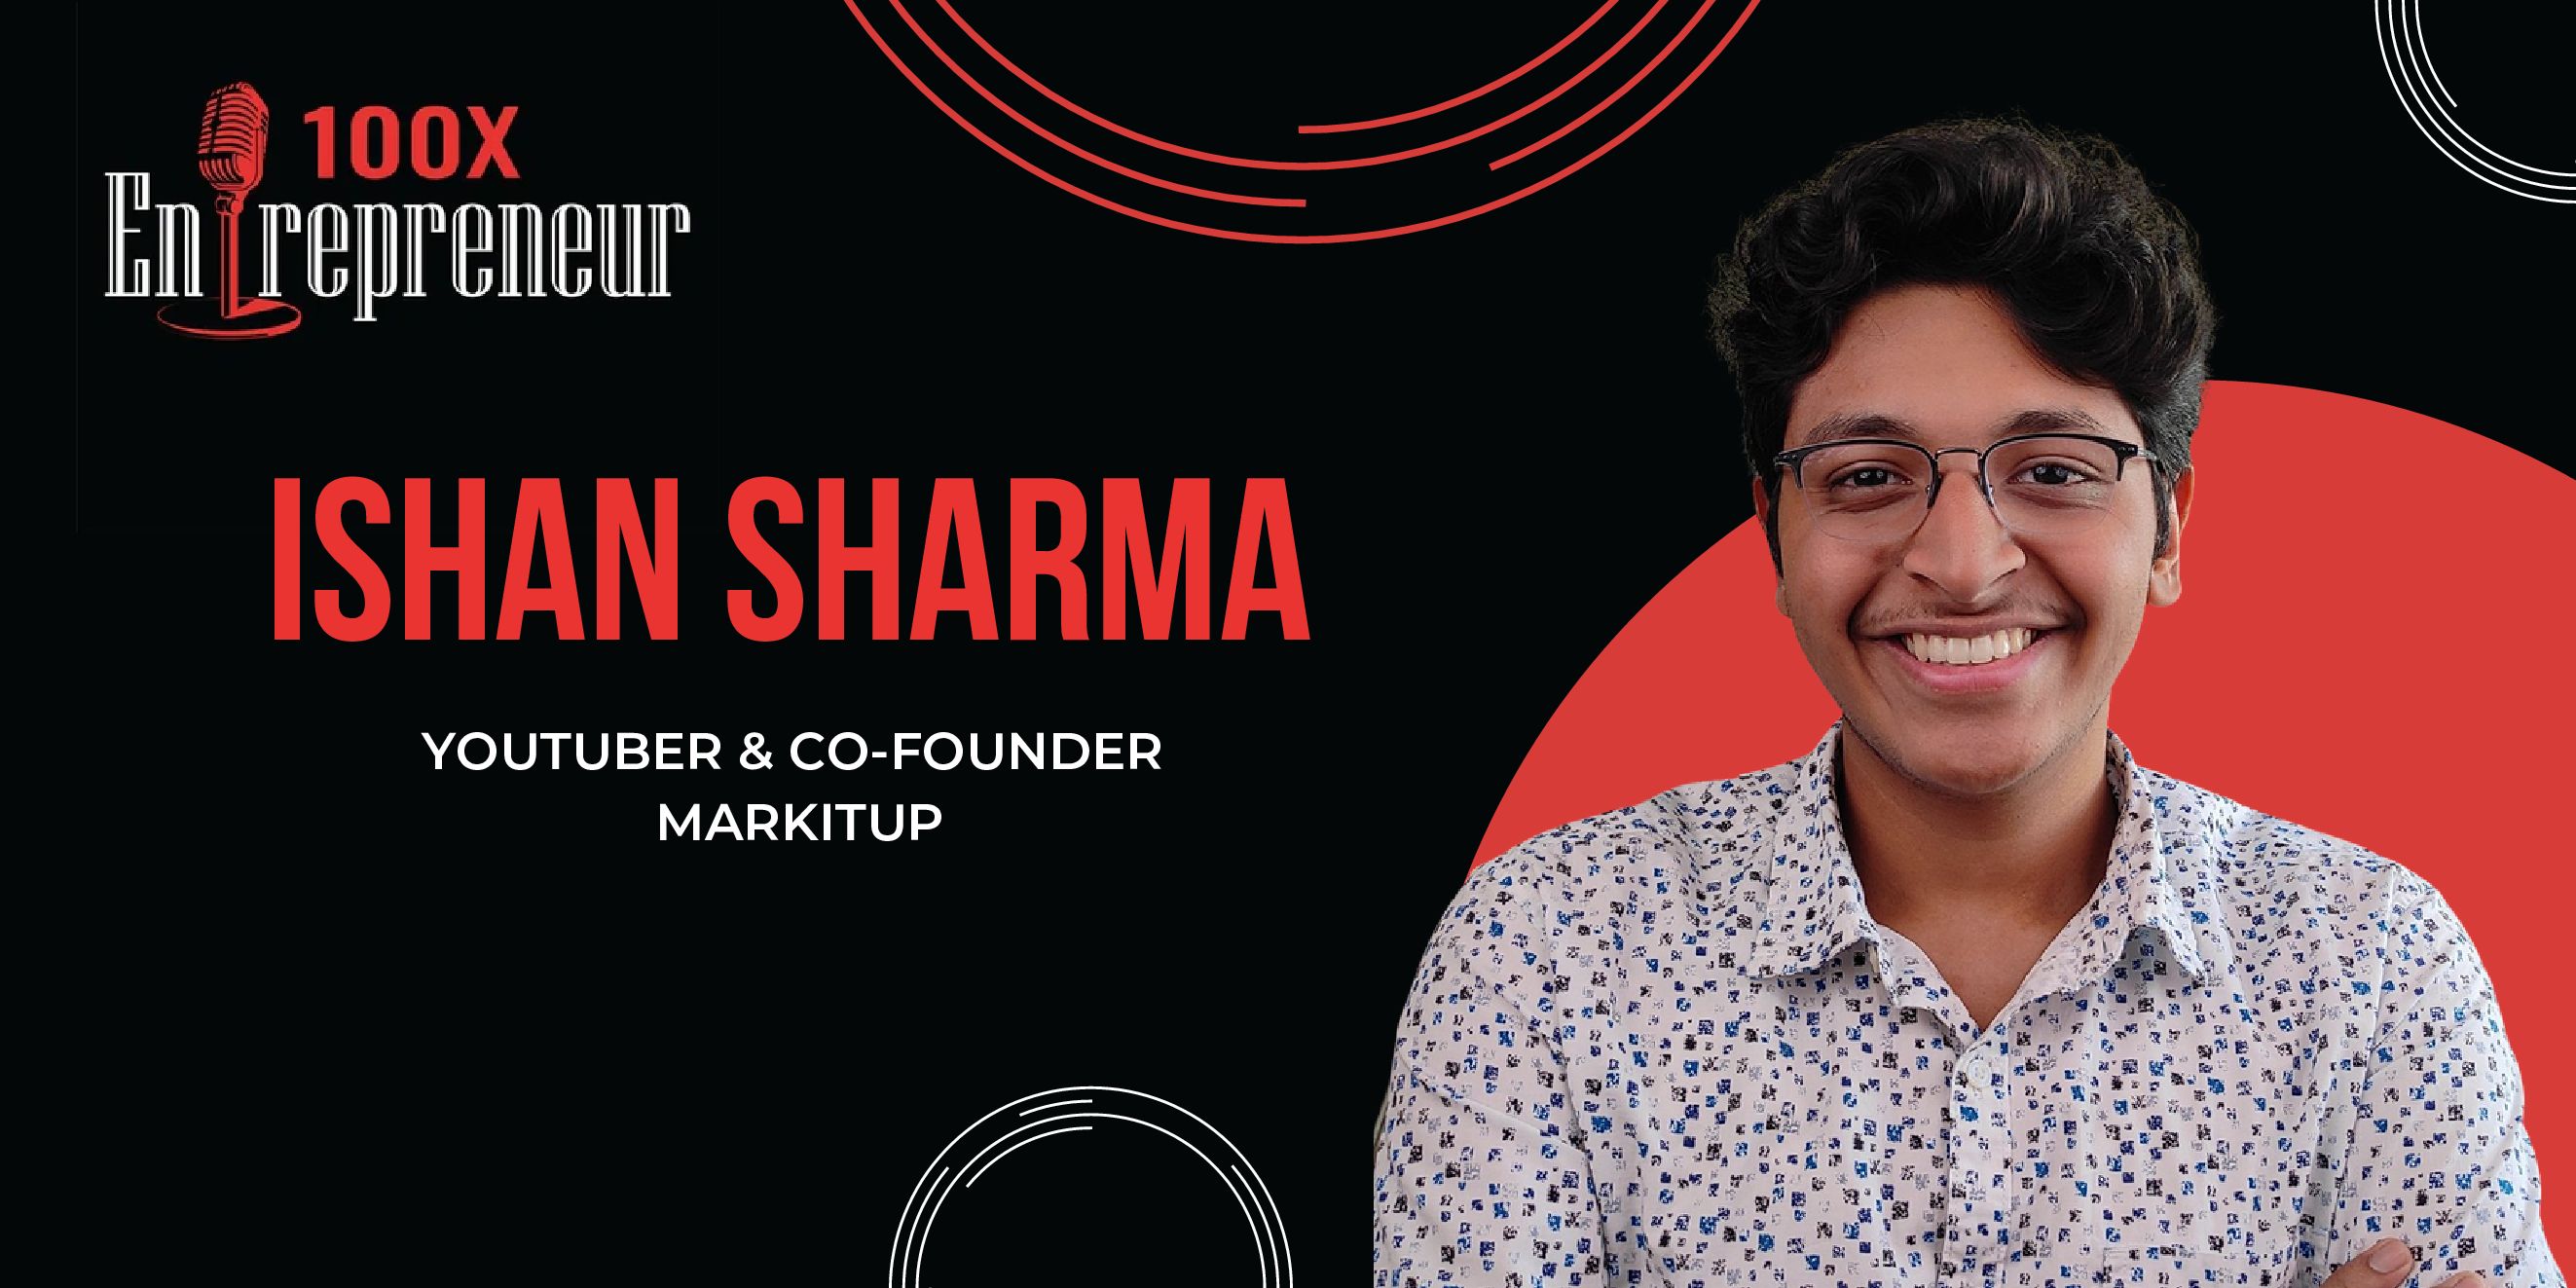 MarkitUp founder dropped out of BITS Pilani to become a YouTuber, launch a startup 